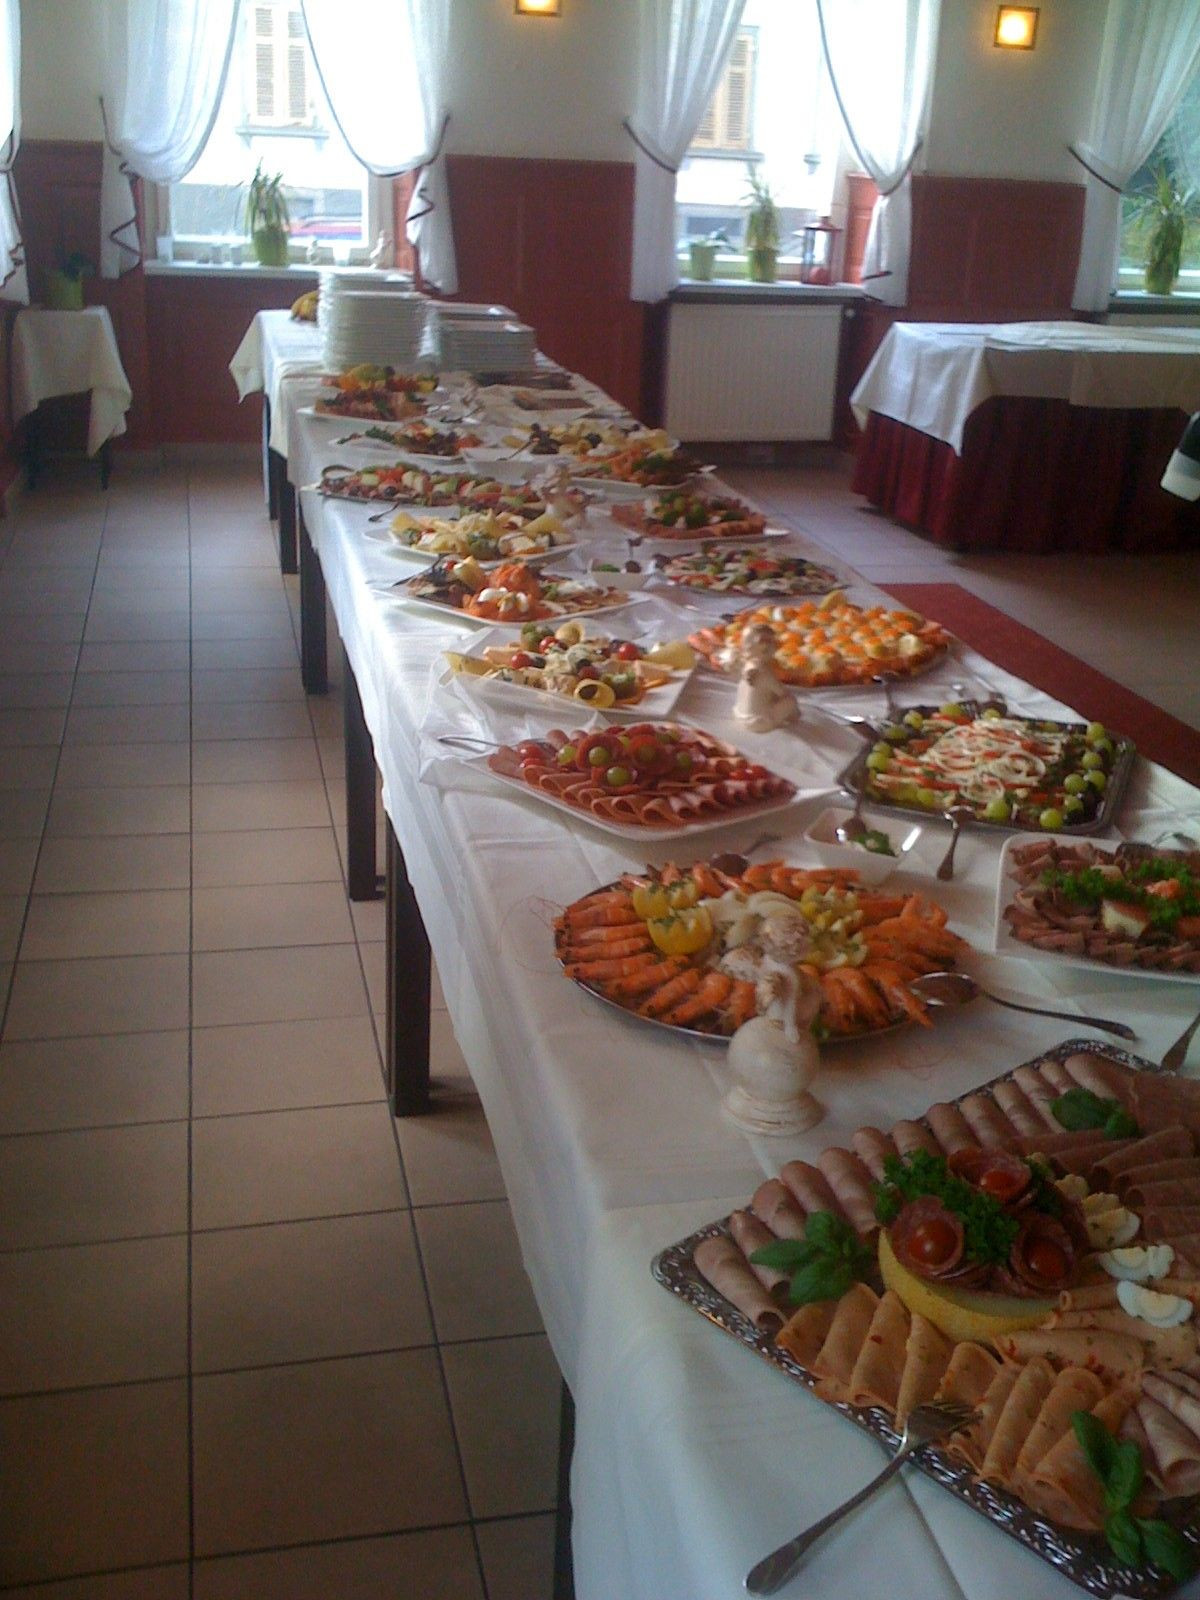 Cold Party Food Ideas Buffet
 Wedding Buffet Cold Appetizers Wedding Ideas